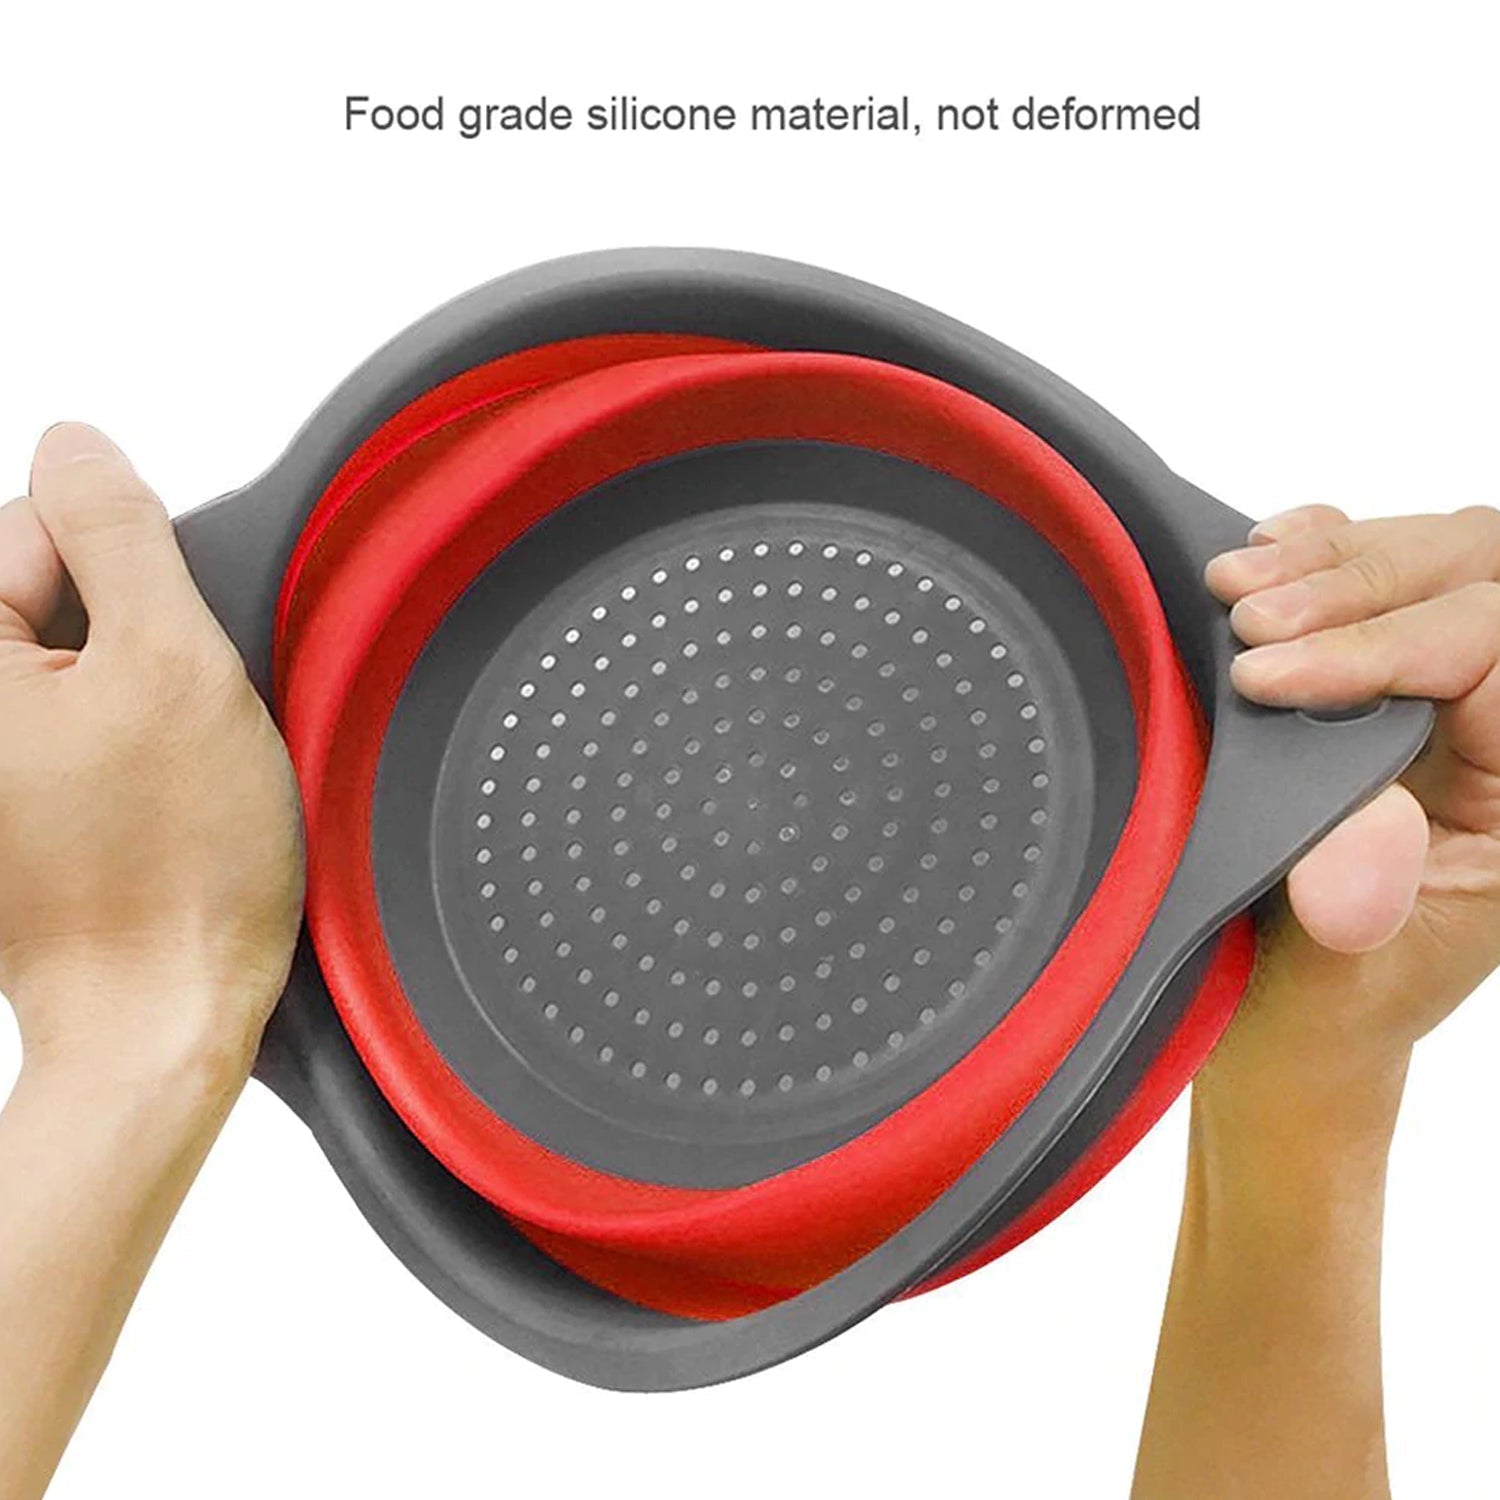 2712 A Round Small Silicone Strainer widely used in all kinds of household kitchen purposes while using at the time of washing utensils for wash basins and sinks etc.